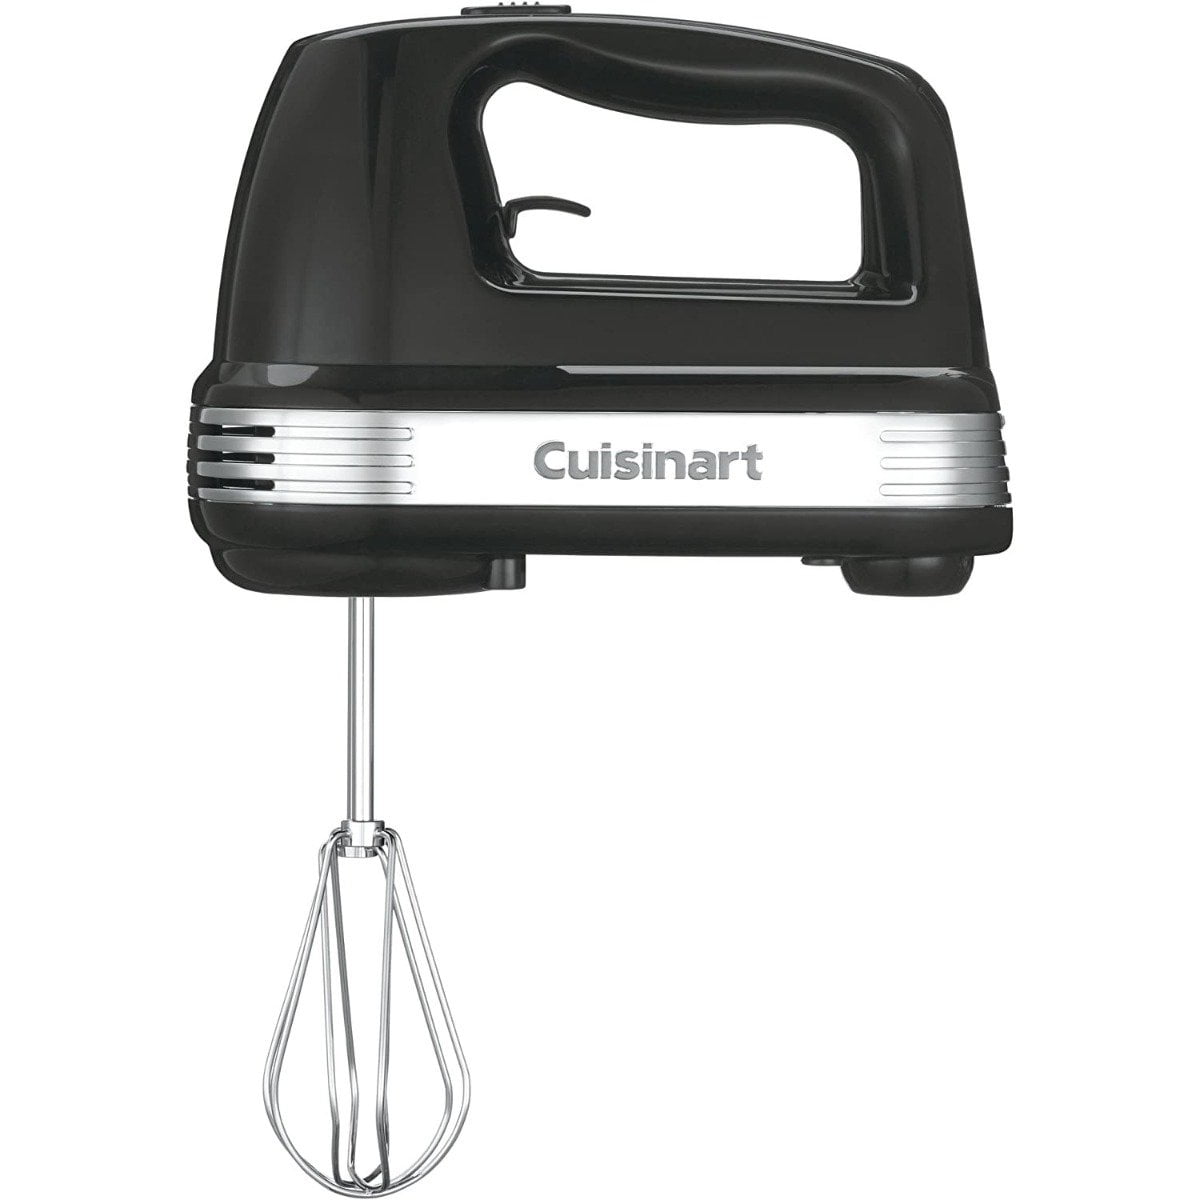 Cuisinart HM-50 Power Advantage 5-Speed Hand Mixer, White & CPT-122 Compact  Plastic 2-Slice Toaster, White